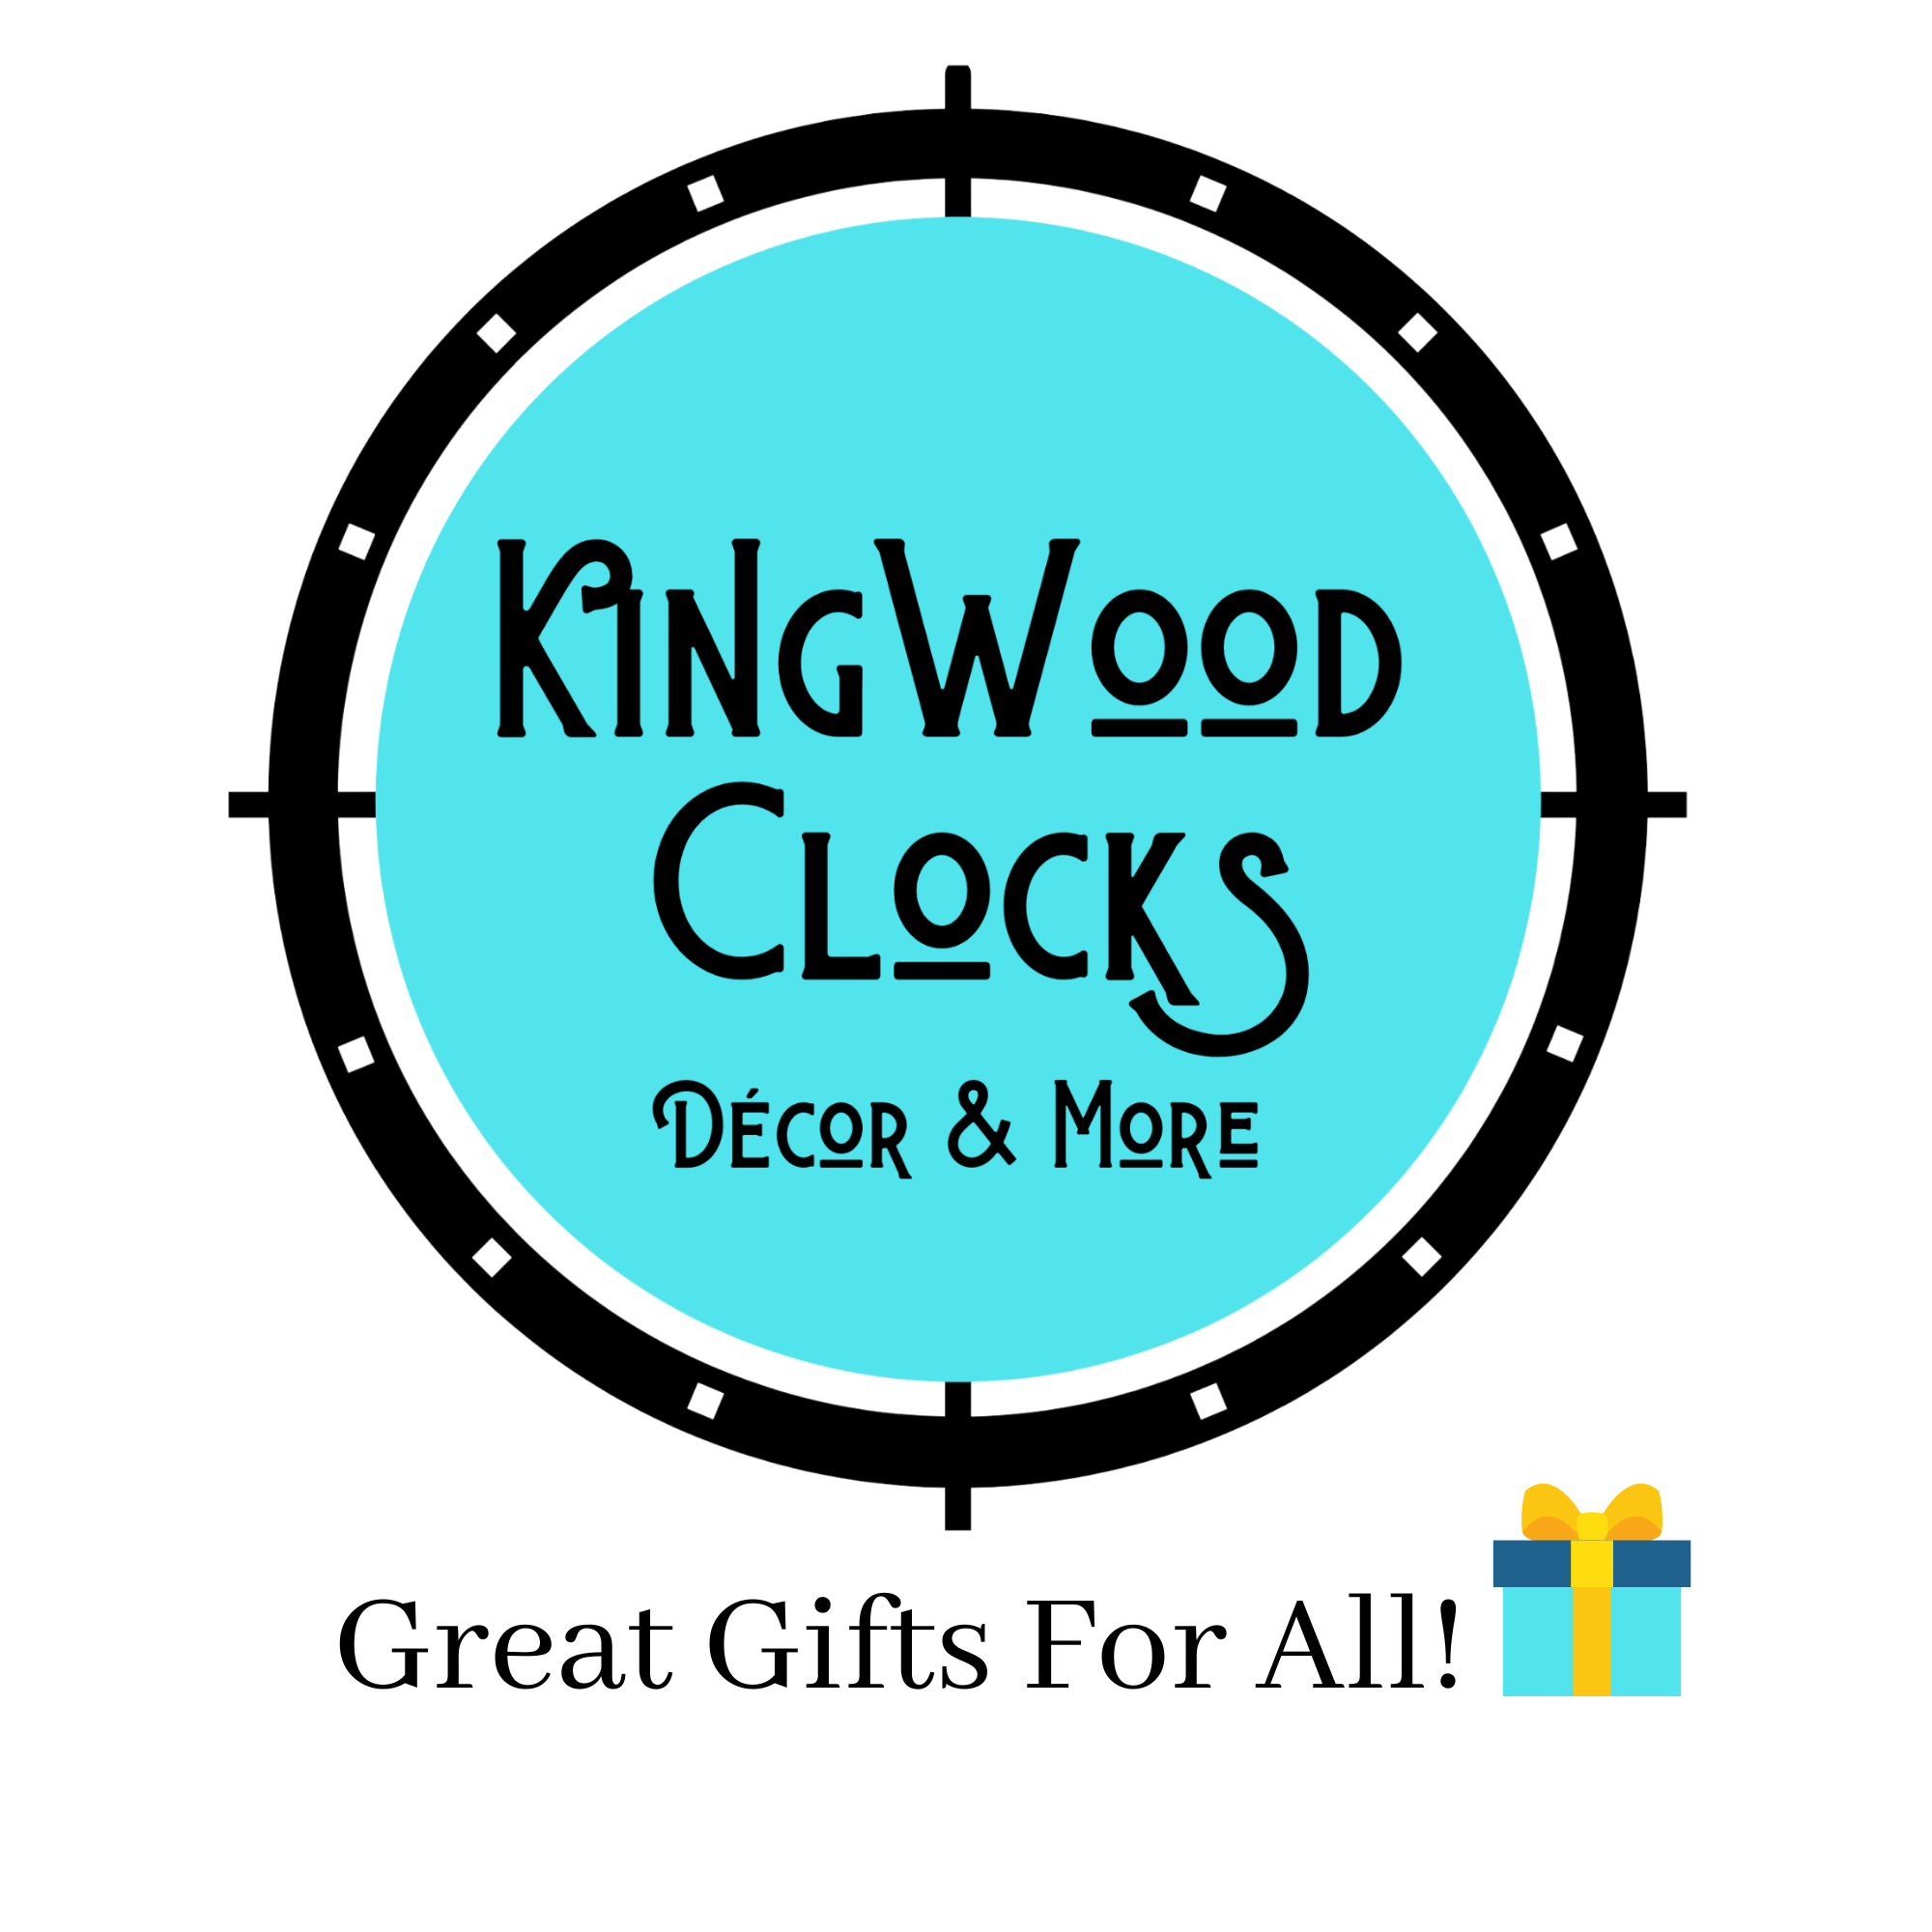 kingwood clocks great gifts for all